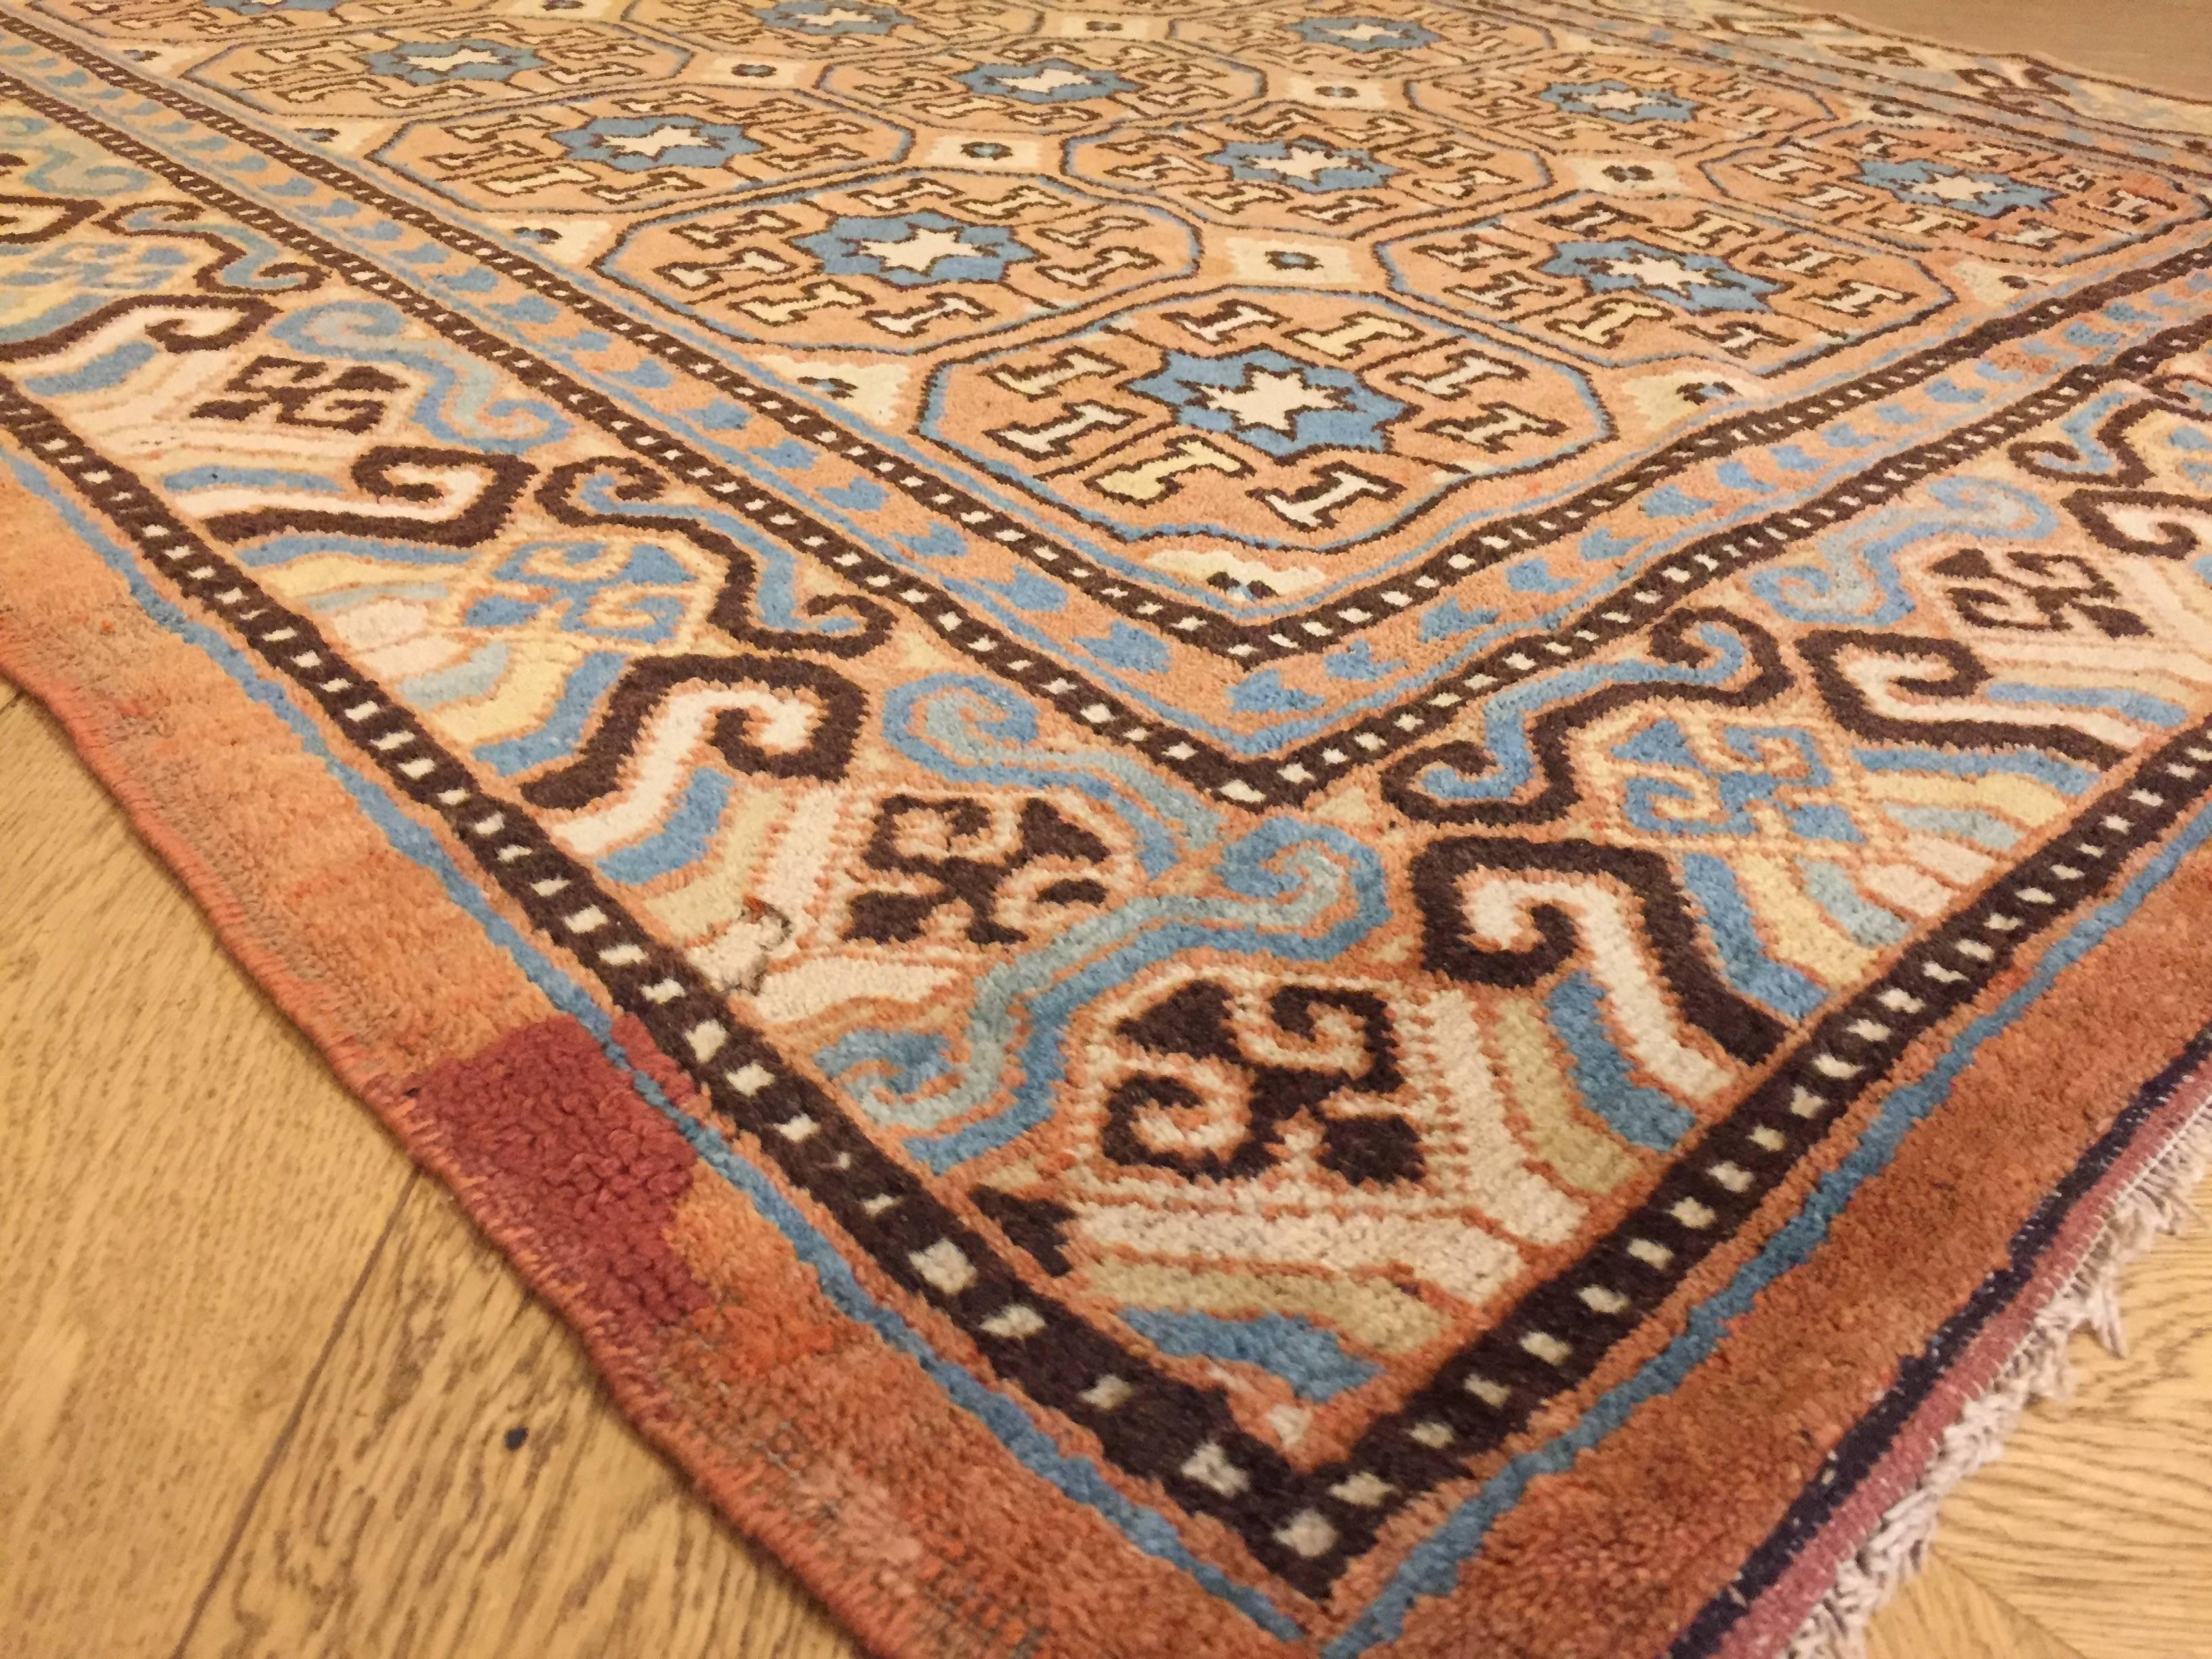 19th Century Brown and Blue Stylized Rosette Gul Chinese Khotan Rug, circa 1870s In Good Condition For Sale In Firenze, IT